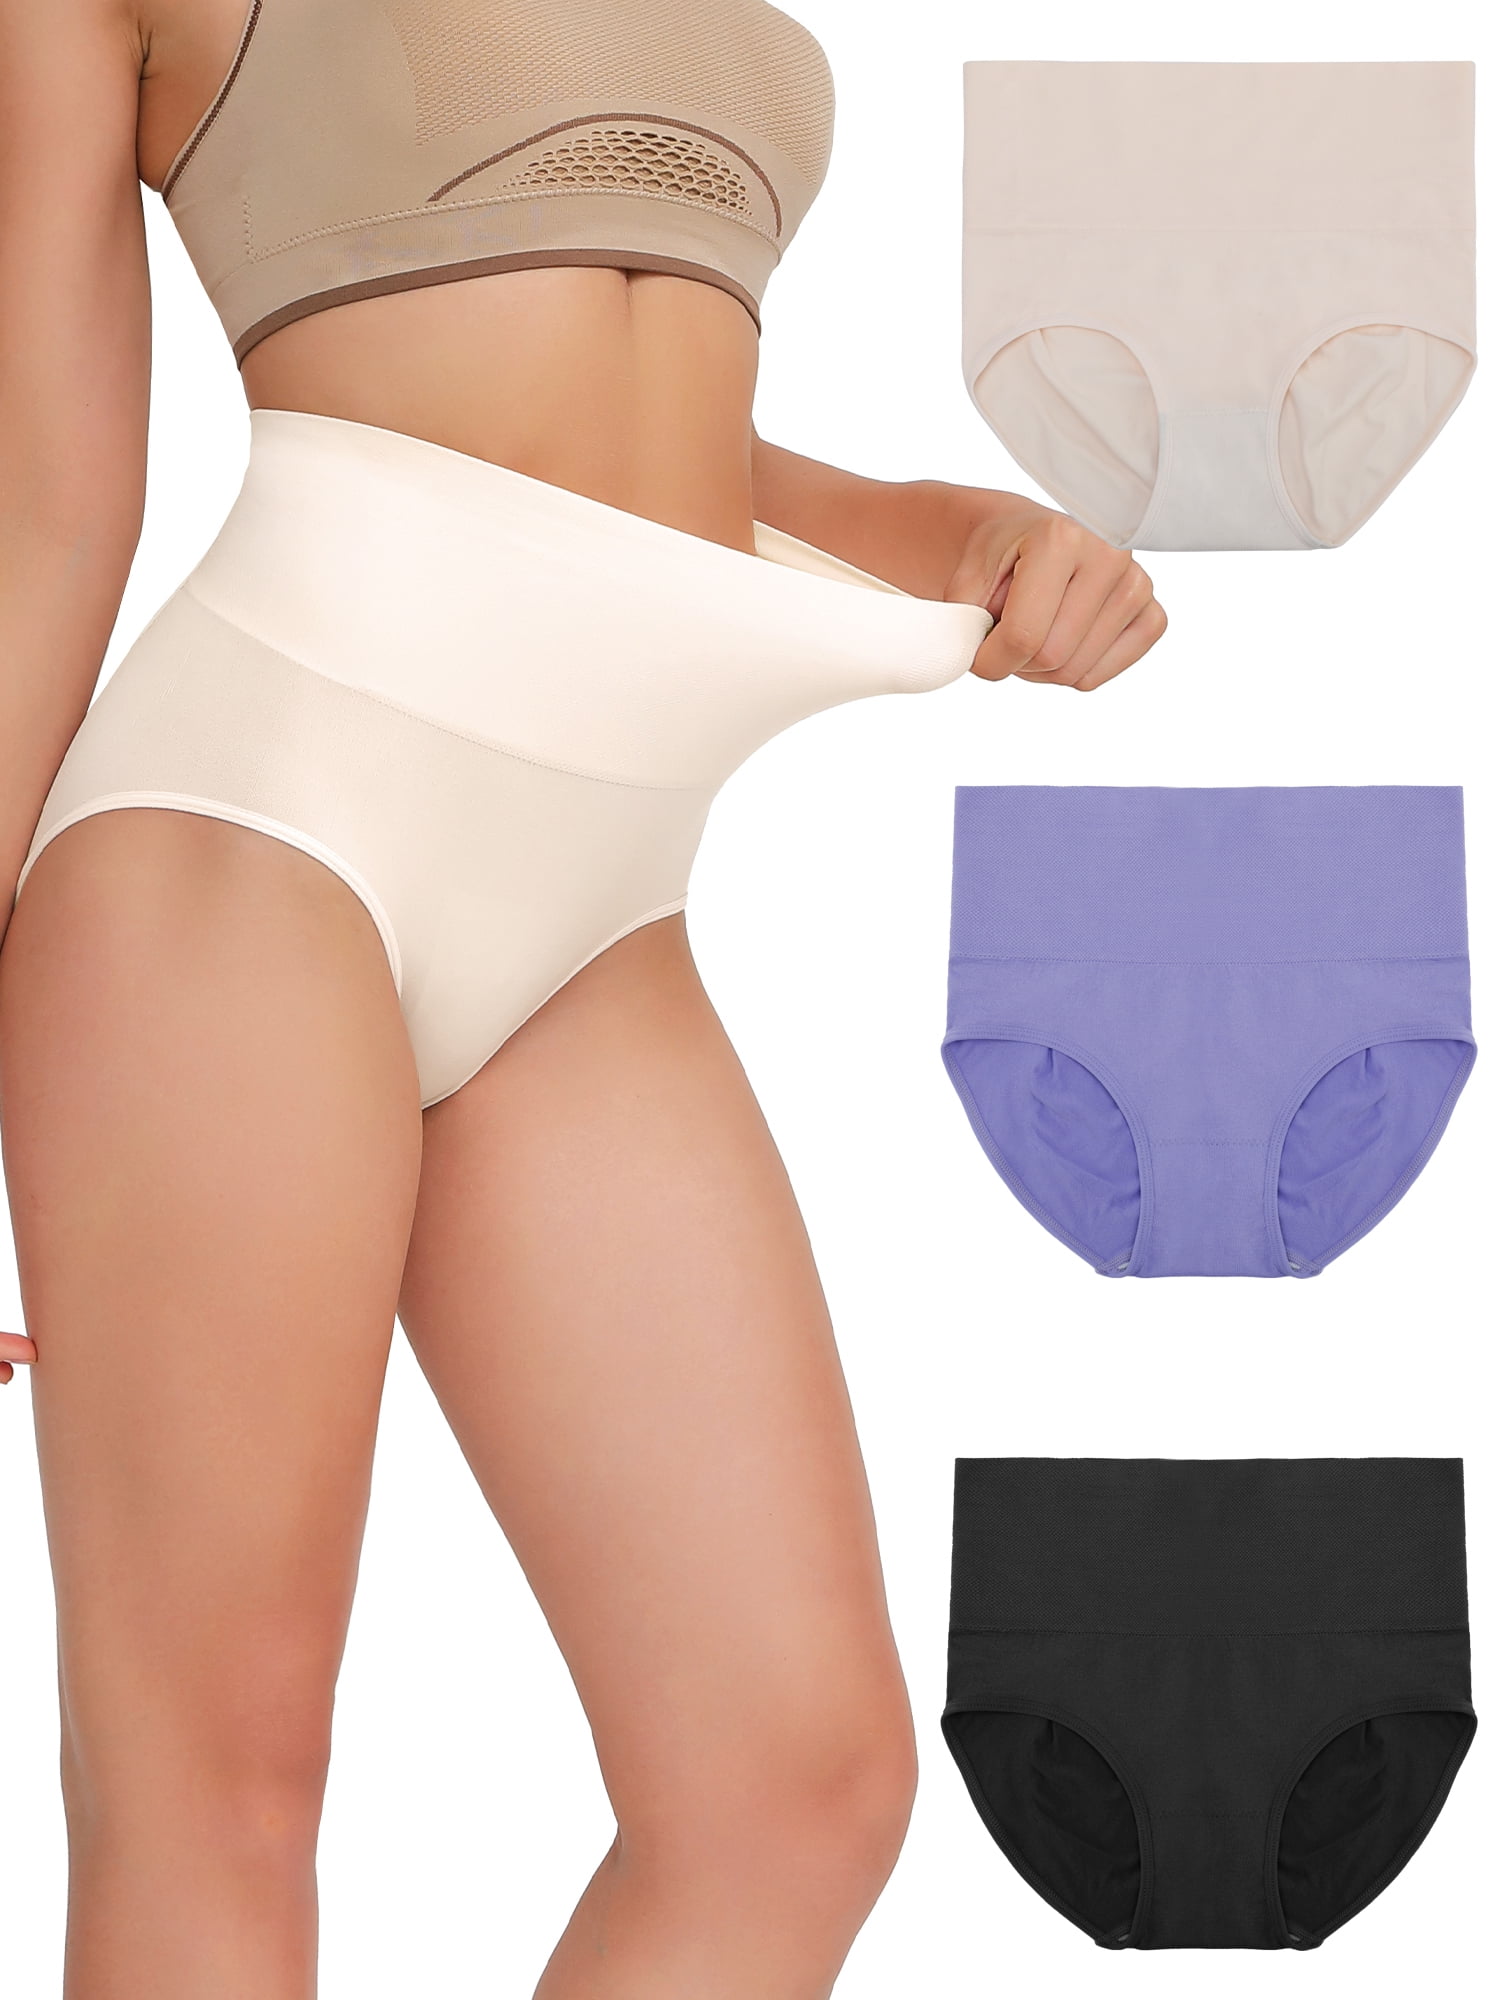 Womens Seamless Stretch Tummy Control Shapewear Panties 3 Pack Ladies Nylon High Waisted Brief